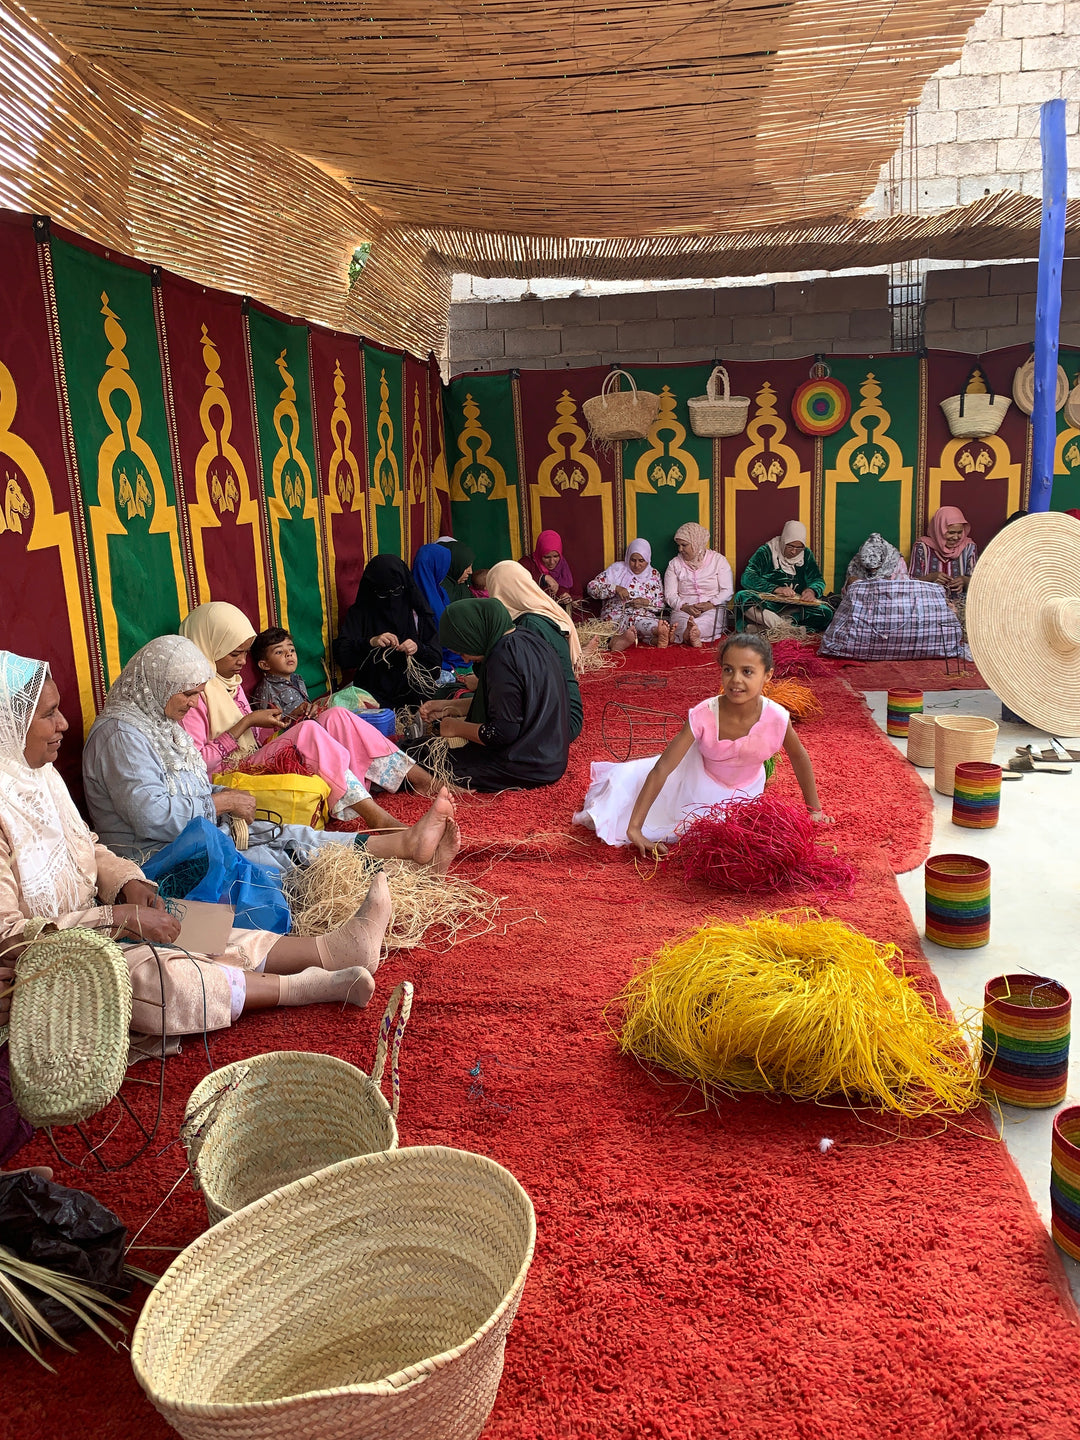 A Look Inside the Women's Basketry Cooperative Where the Maroc Collection is Made